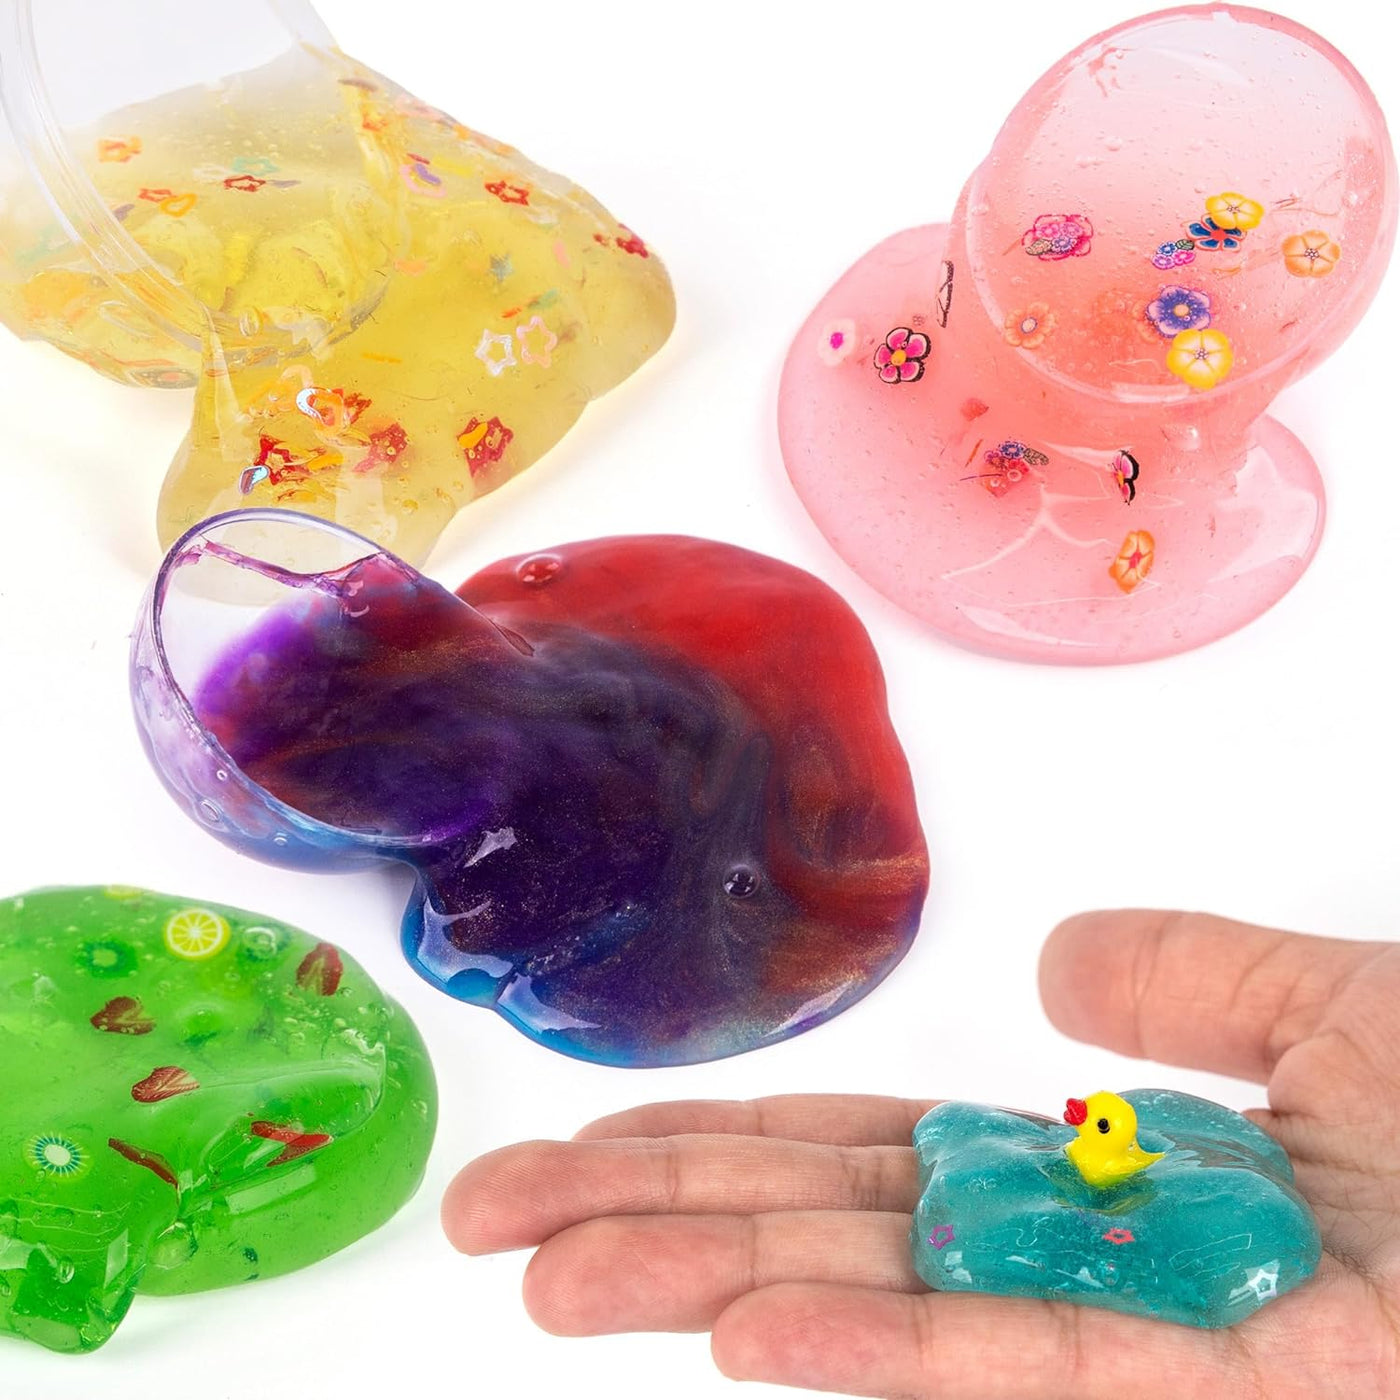 Galaxy Slime Toys for Kids, Set of 12 Slime Party Favors for Kids - Includes 8 Galaxy and 4 Clear Slime Balls with Charms Inside